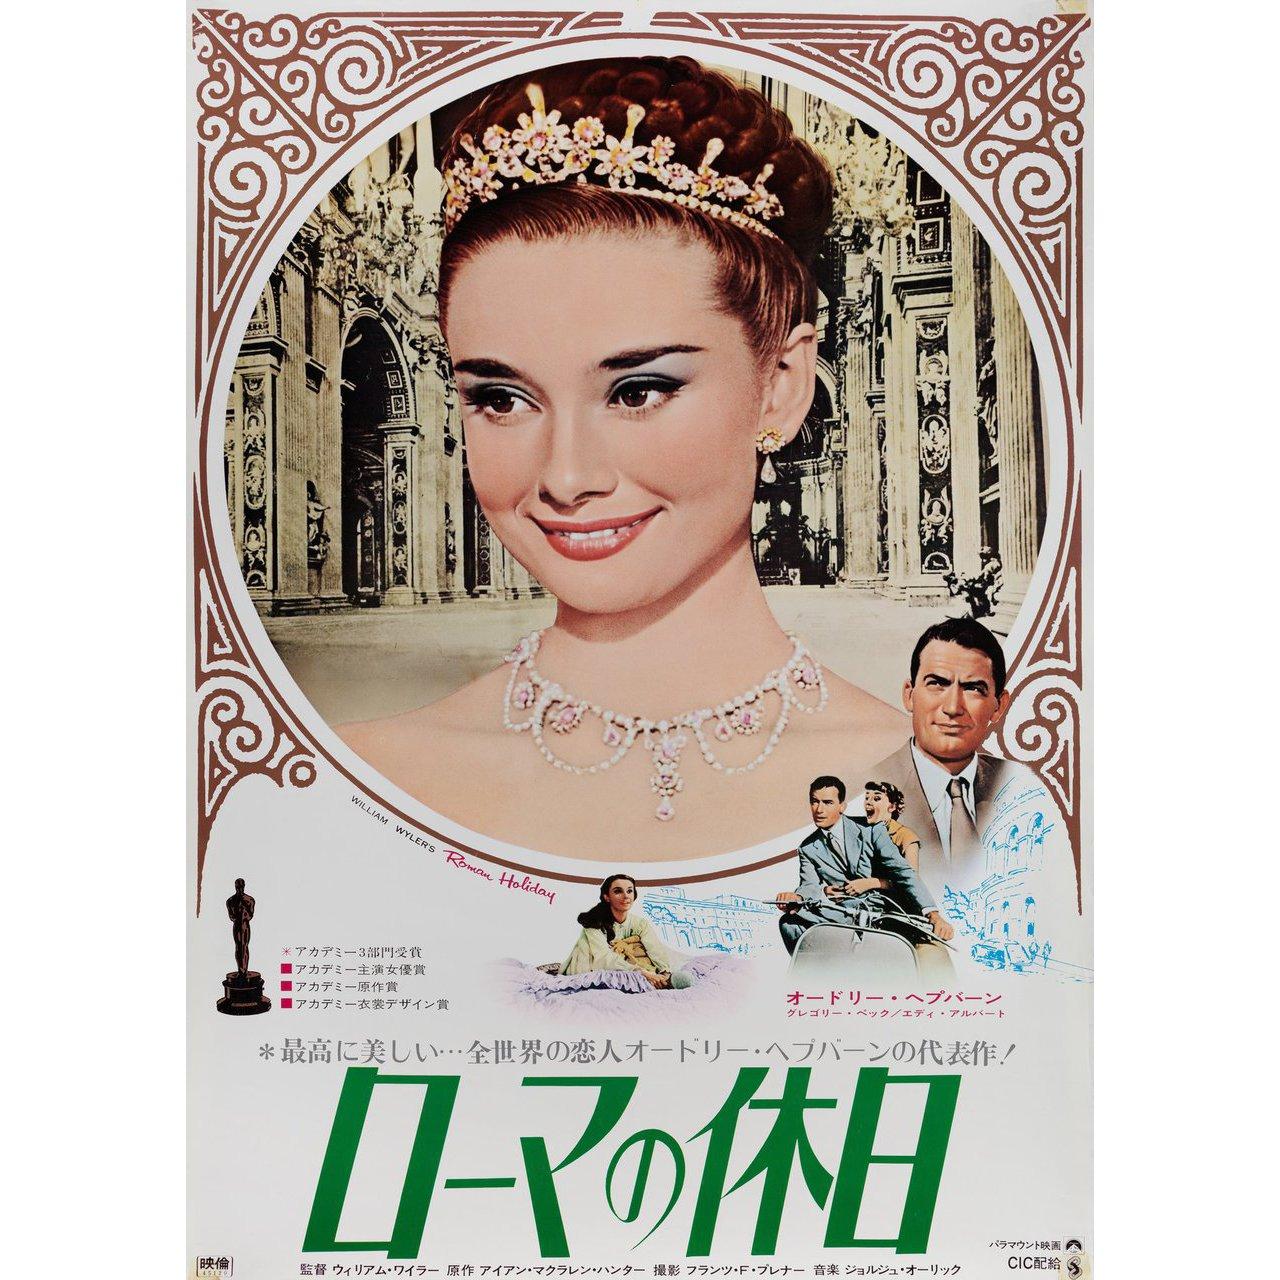 Original 1969 re-release Japanese B2 poster for the 1953 film Roman Holiday directed by William Wyler with Gregory Peck / Audrey Hepburn / Eddie Albert / Hartley Power. Very Good-Fine condition, rolled. Please note: the size is stated in inches and